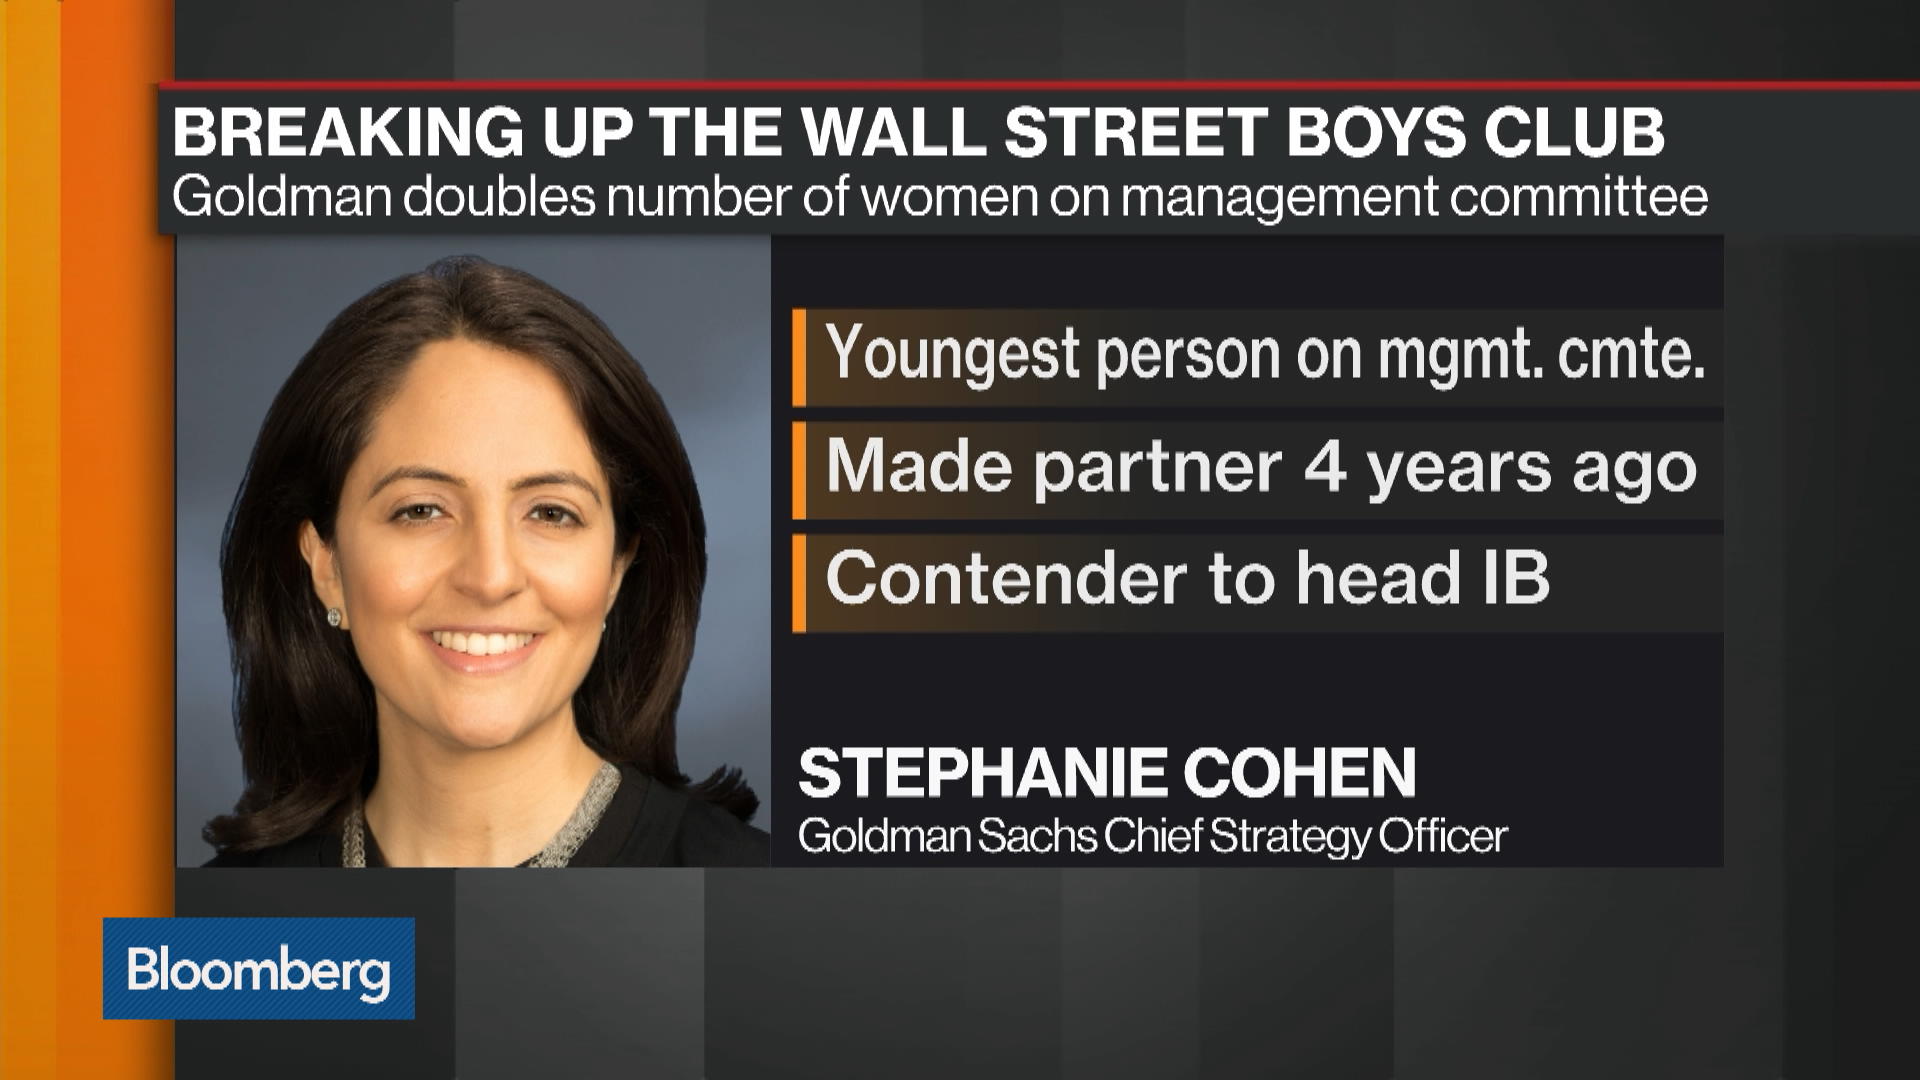 Top Goldman exec Stephanie Cohen's 'leave' may be permanent